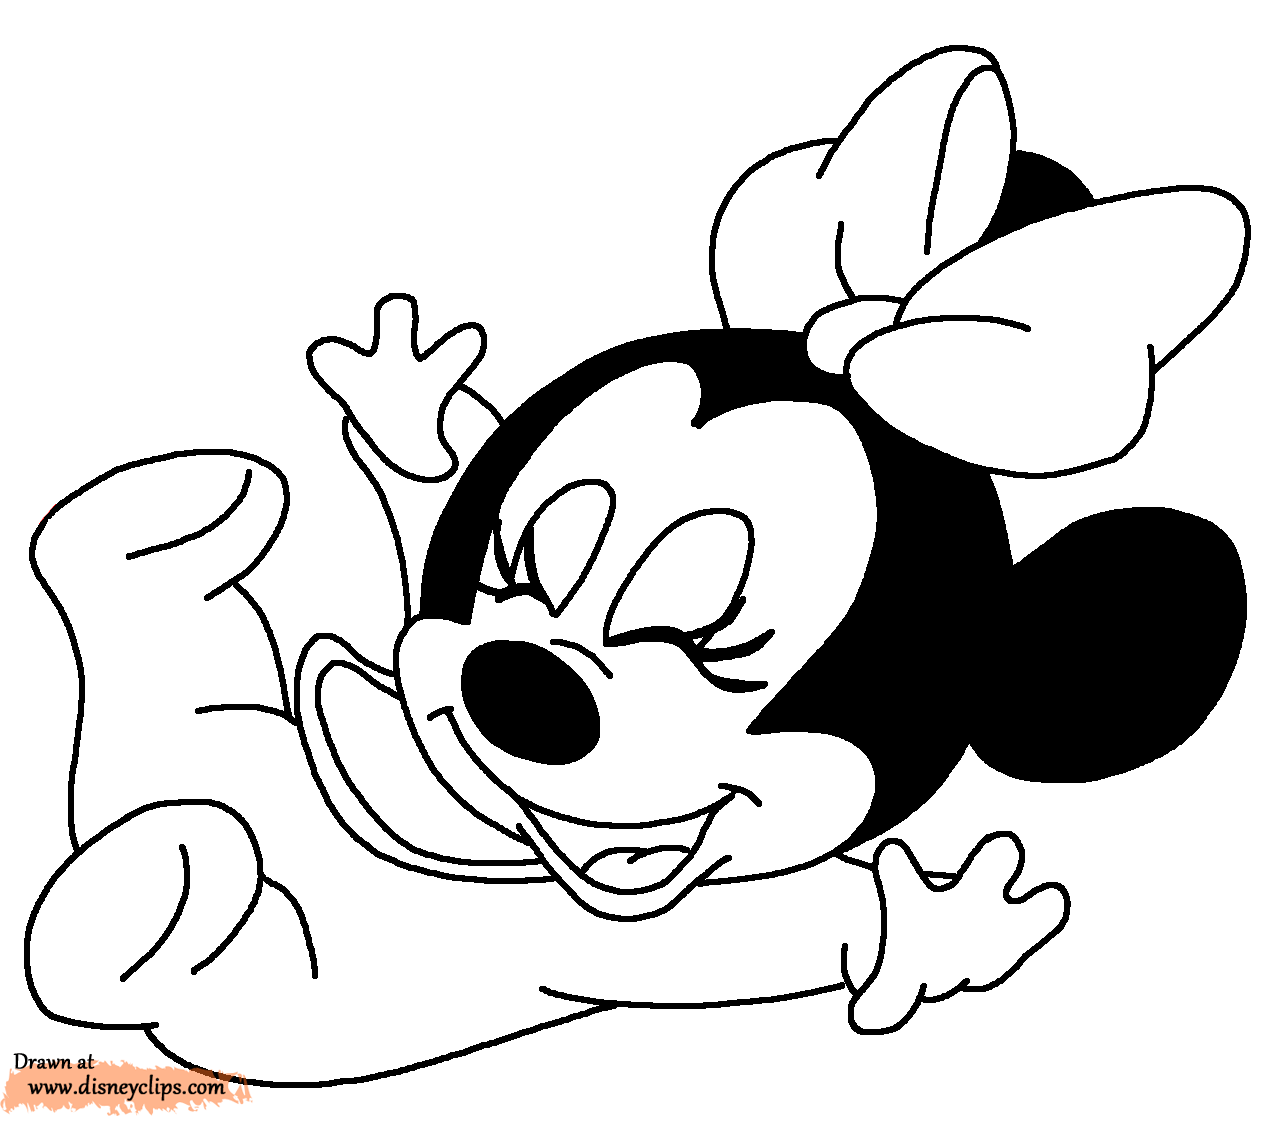 coloring pages disney coloring pages christmas disney gtgt disney coloring pages coloring disney pages 